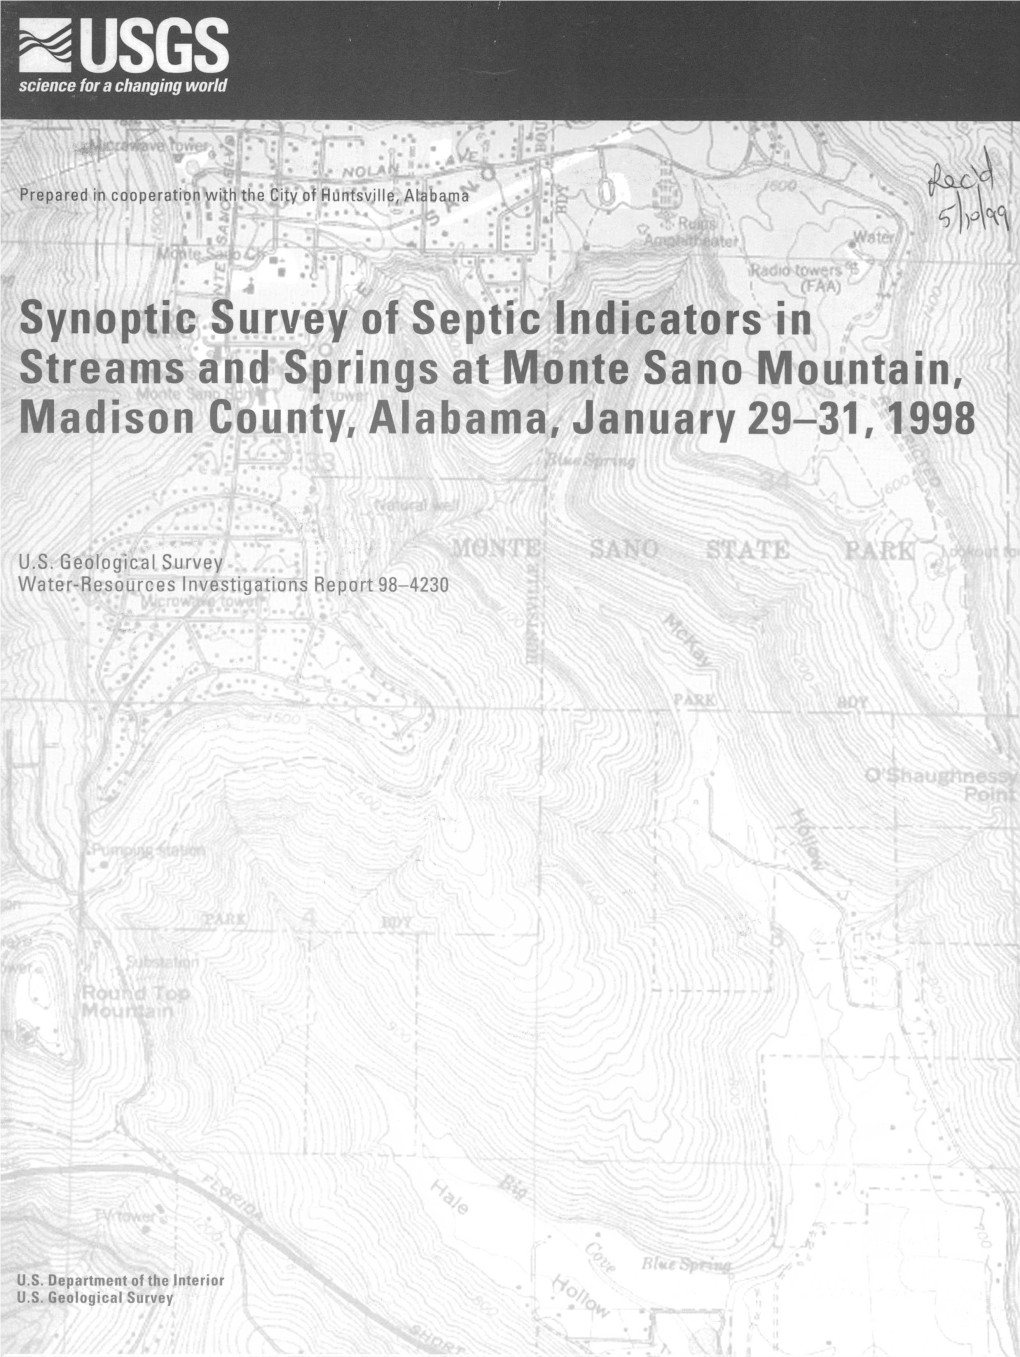 Synoptic Survey of Septic Indicators in Streams and Springs at Monte Sano Mountain, Madison County, Alabama, January 29-31,1998